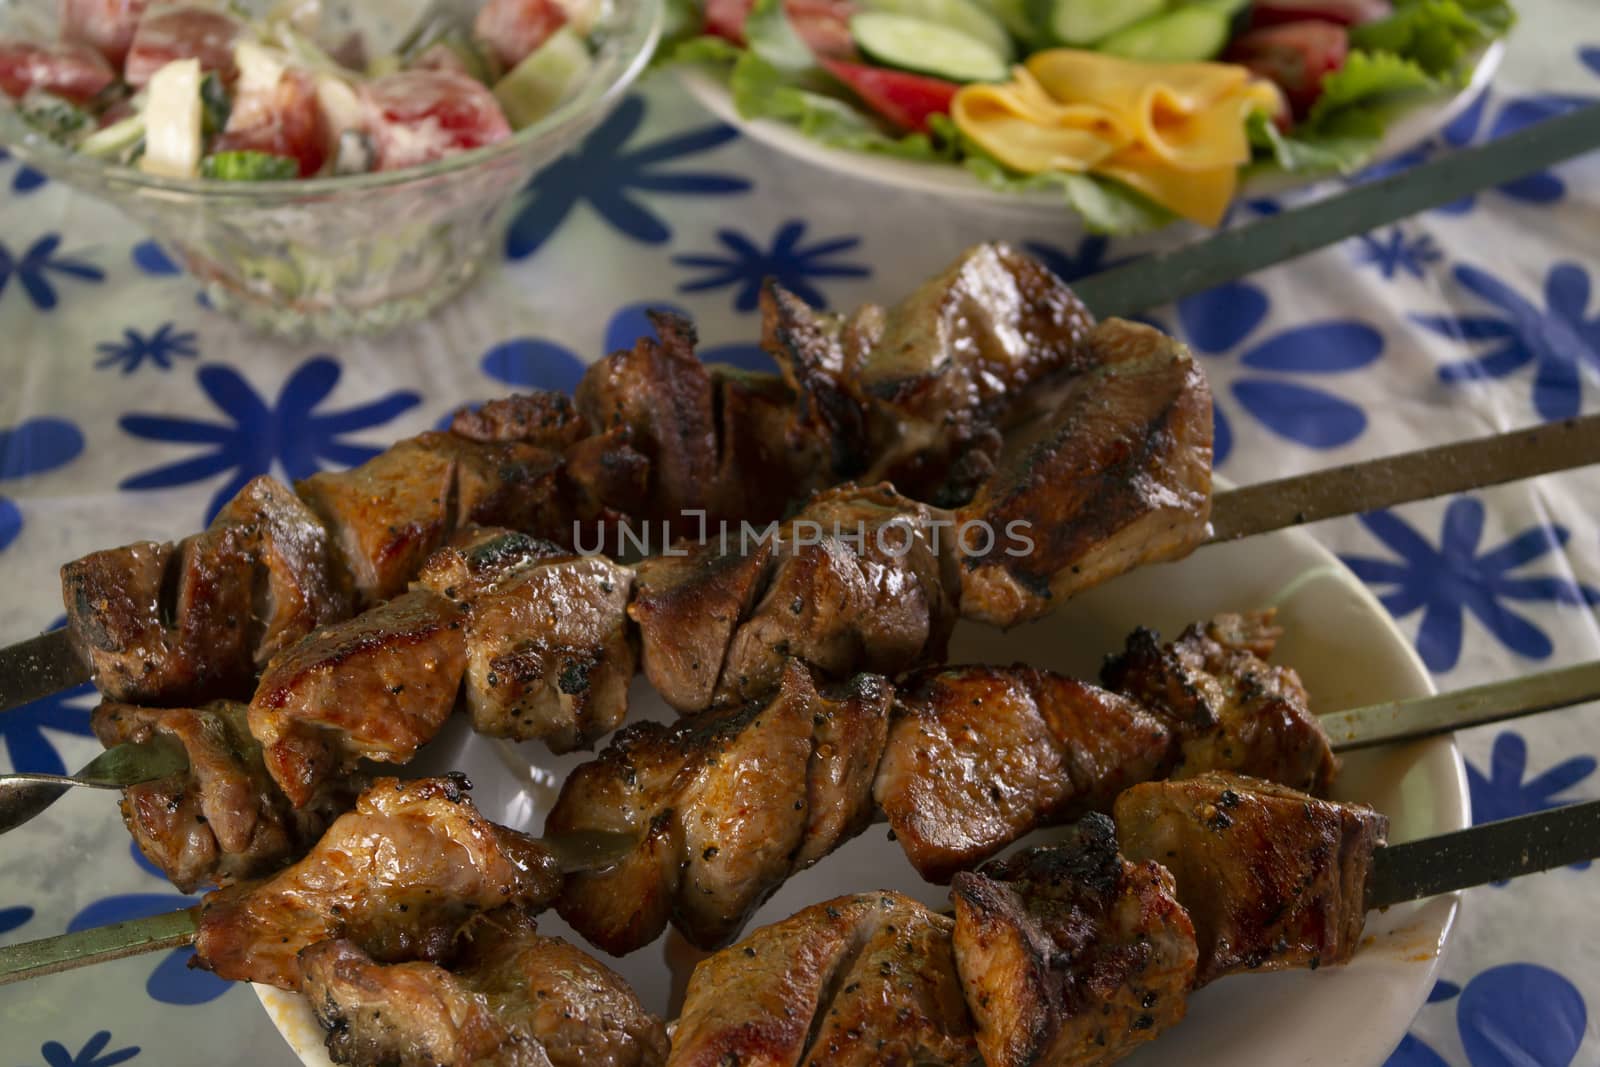 Juicy, fragrant kebabs on the grill